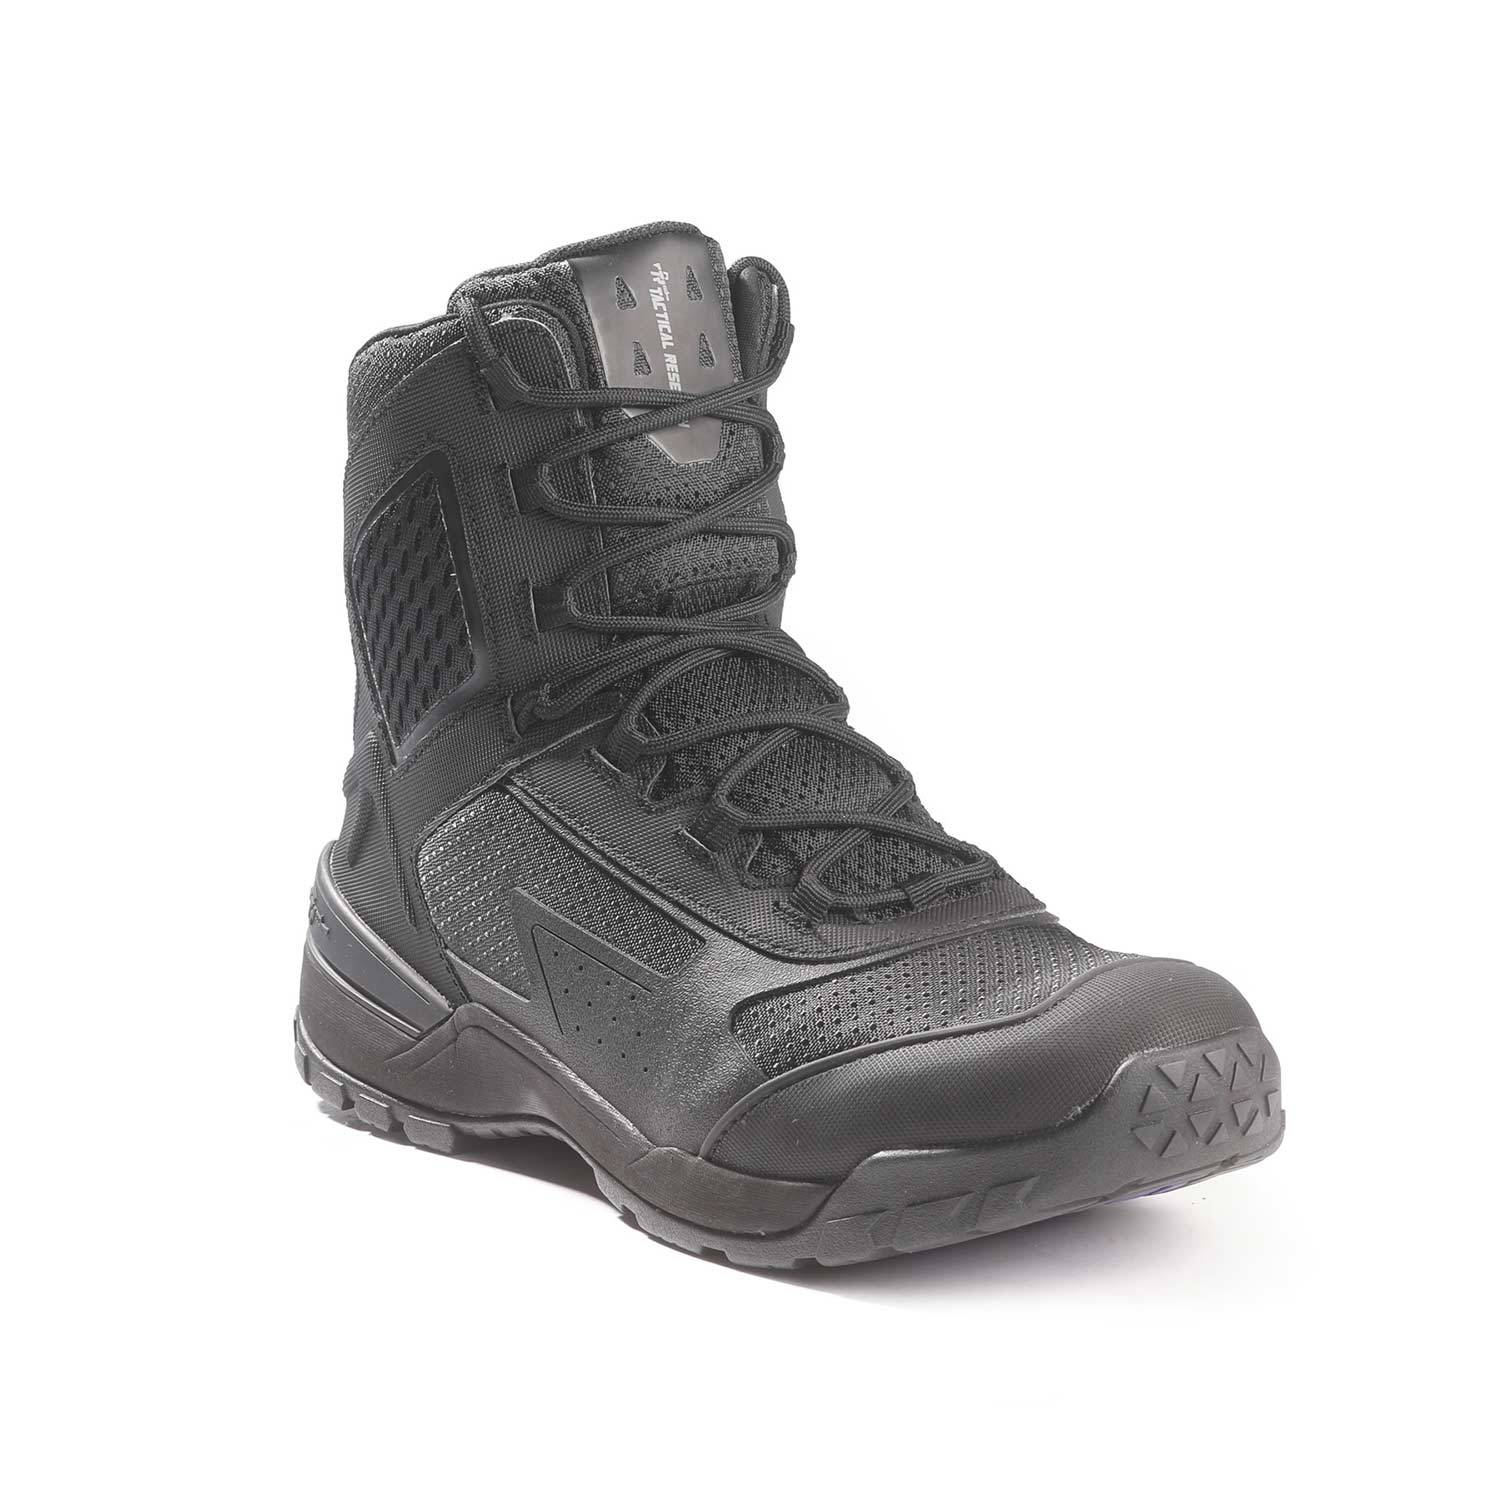 Tactical Research Ultralight 10-40 7" Hot Weather Boot